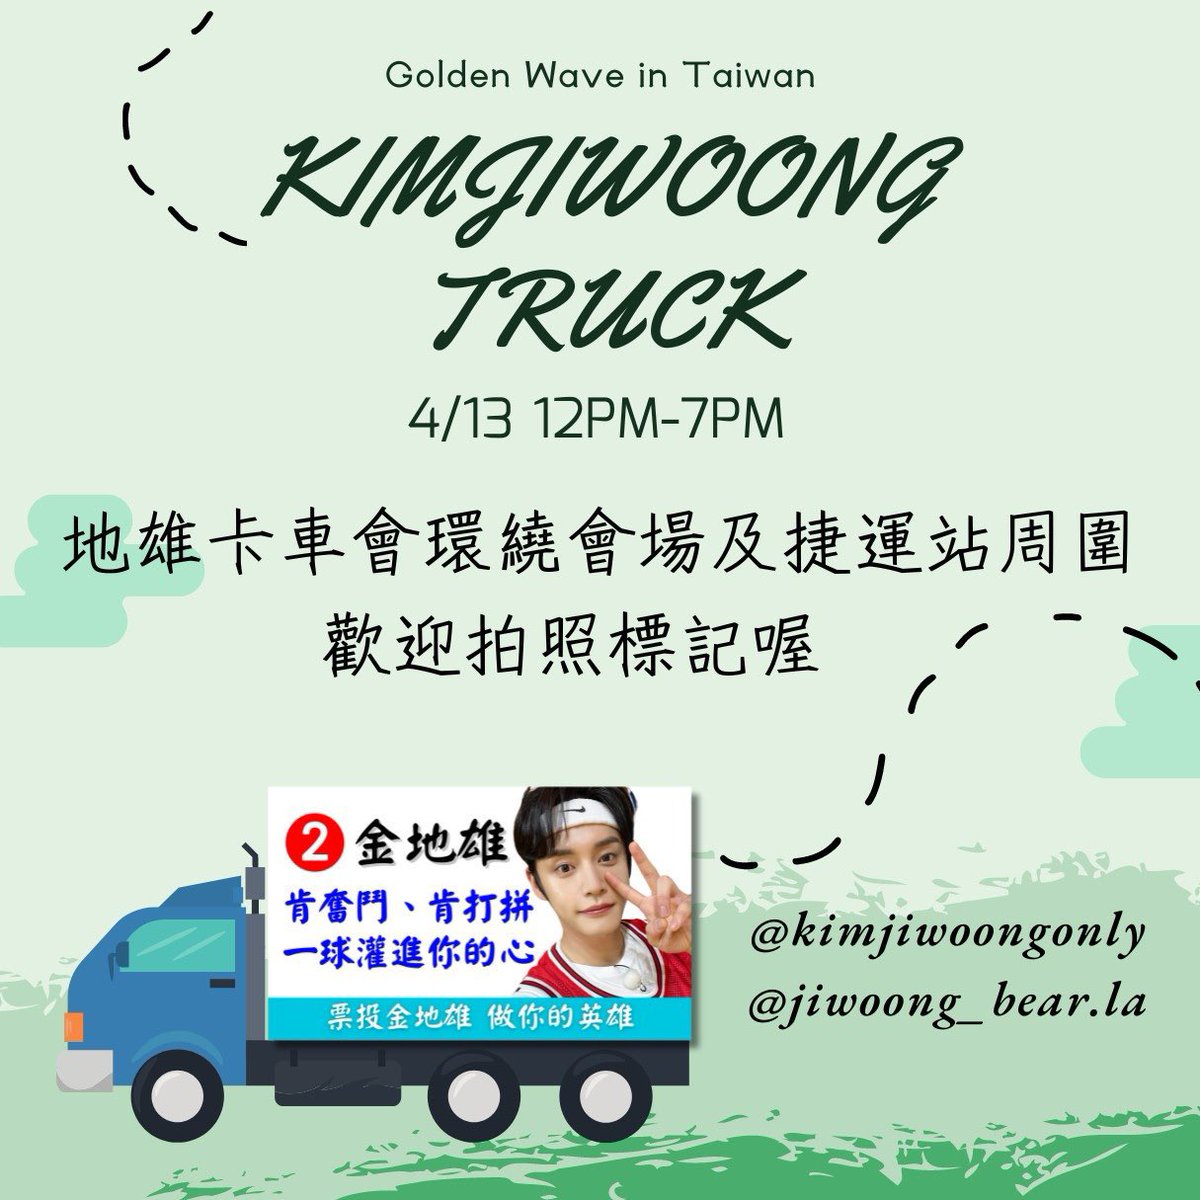 there’s actually four support trucks for Jiwoong today going around the concert venue and MRT station from 12pm-7pm 🥹💕 

#김지웅 #KIMJIWOONG 
#キムジウン #金地雄 #ZEROBASEONE
#JIWOONG_TRUCK_TW